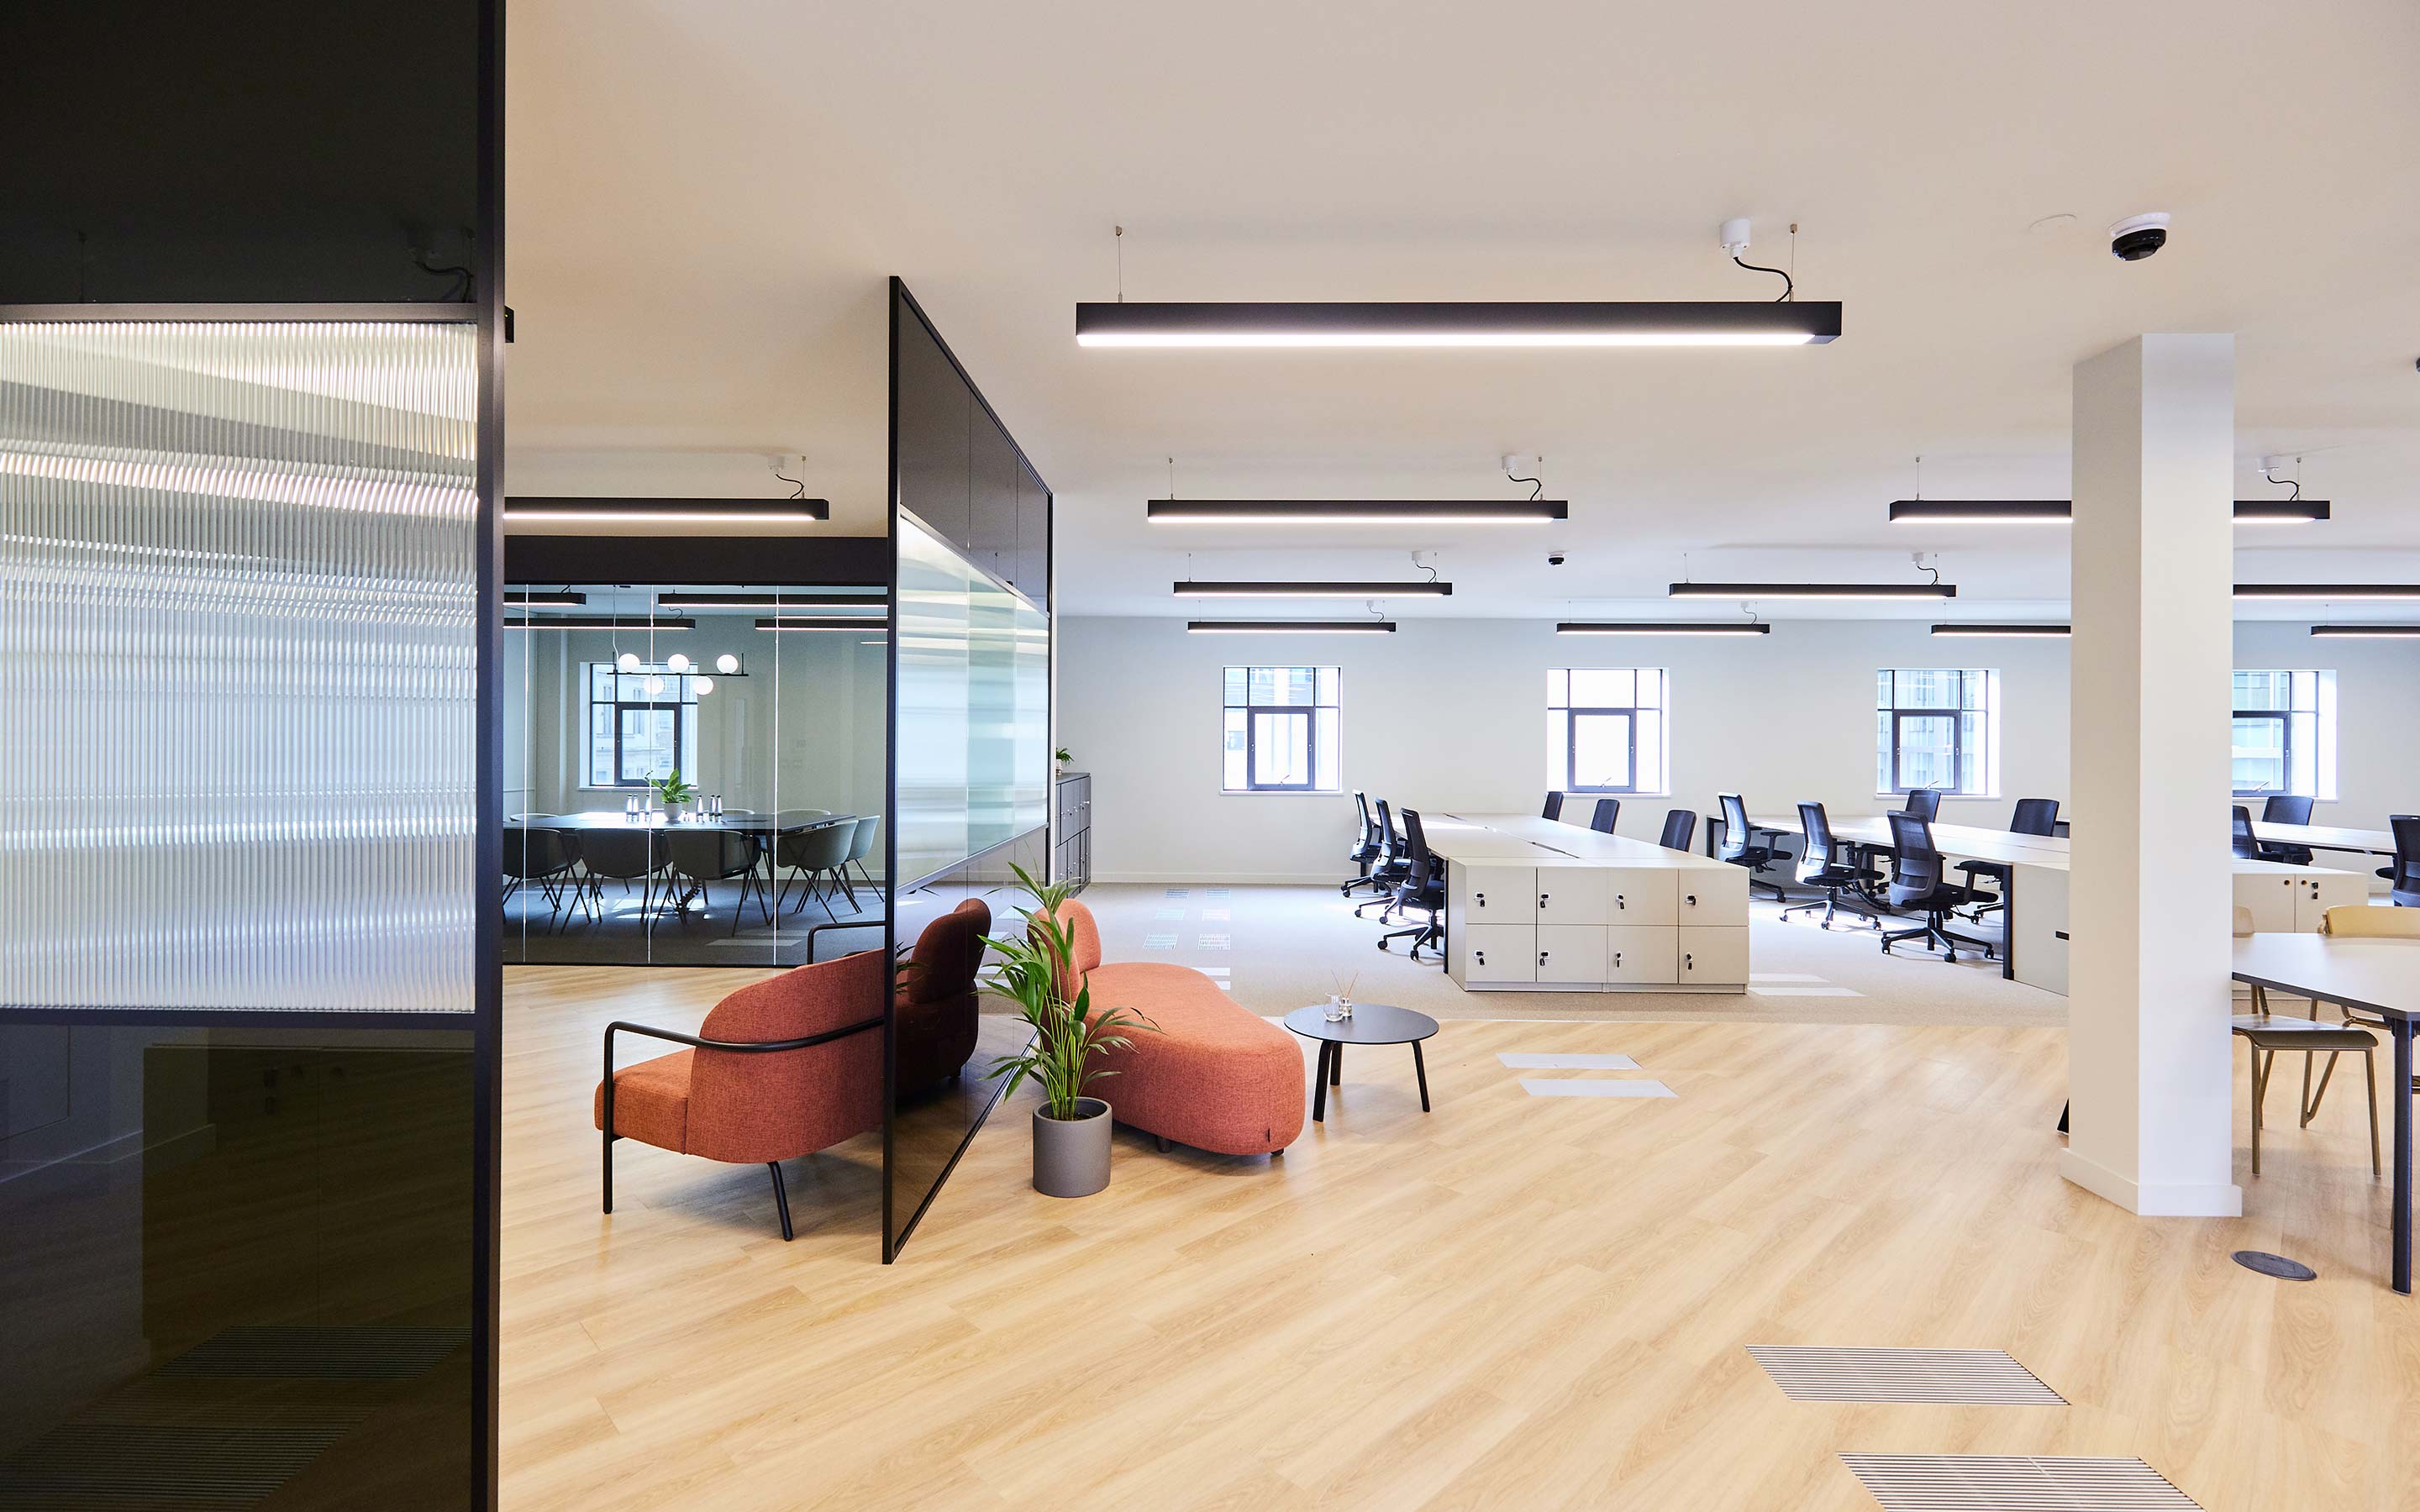 Spacious London office with open-plan desking, pale wooden floors, and soft-seating for visitors to relax